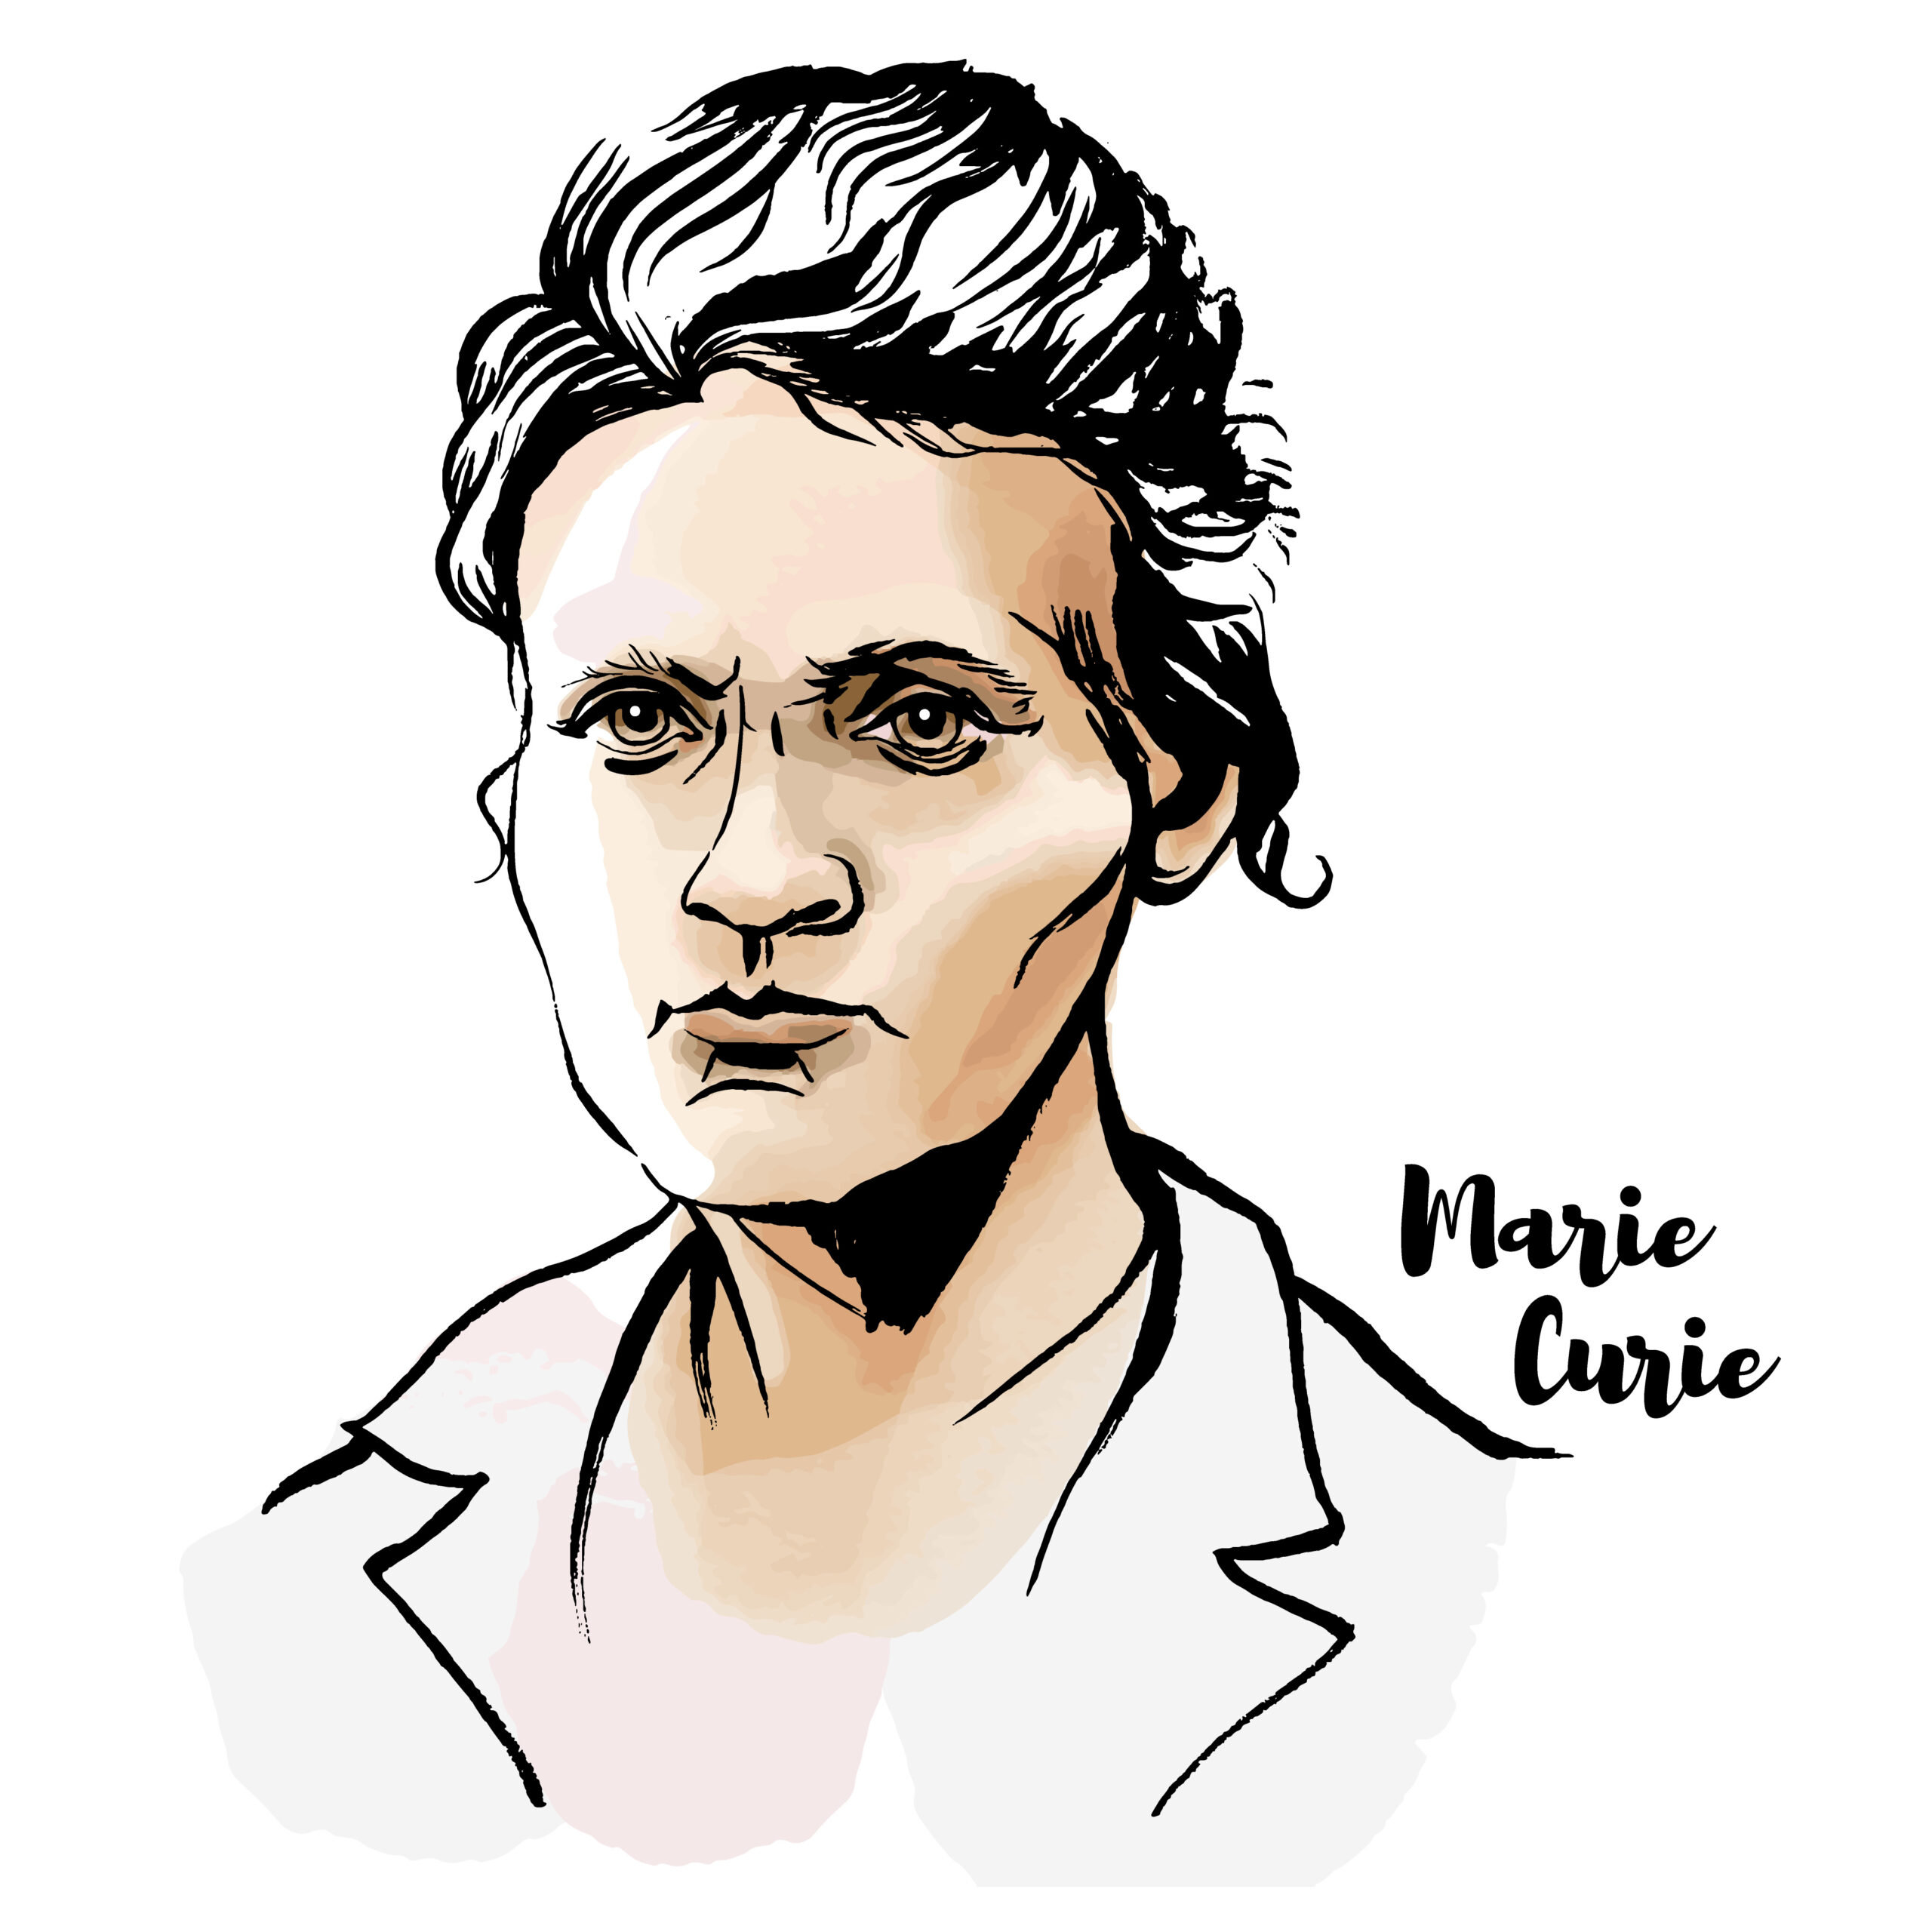 12 Women scientists who changed the world